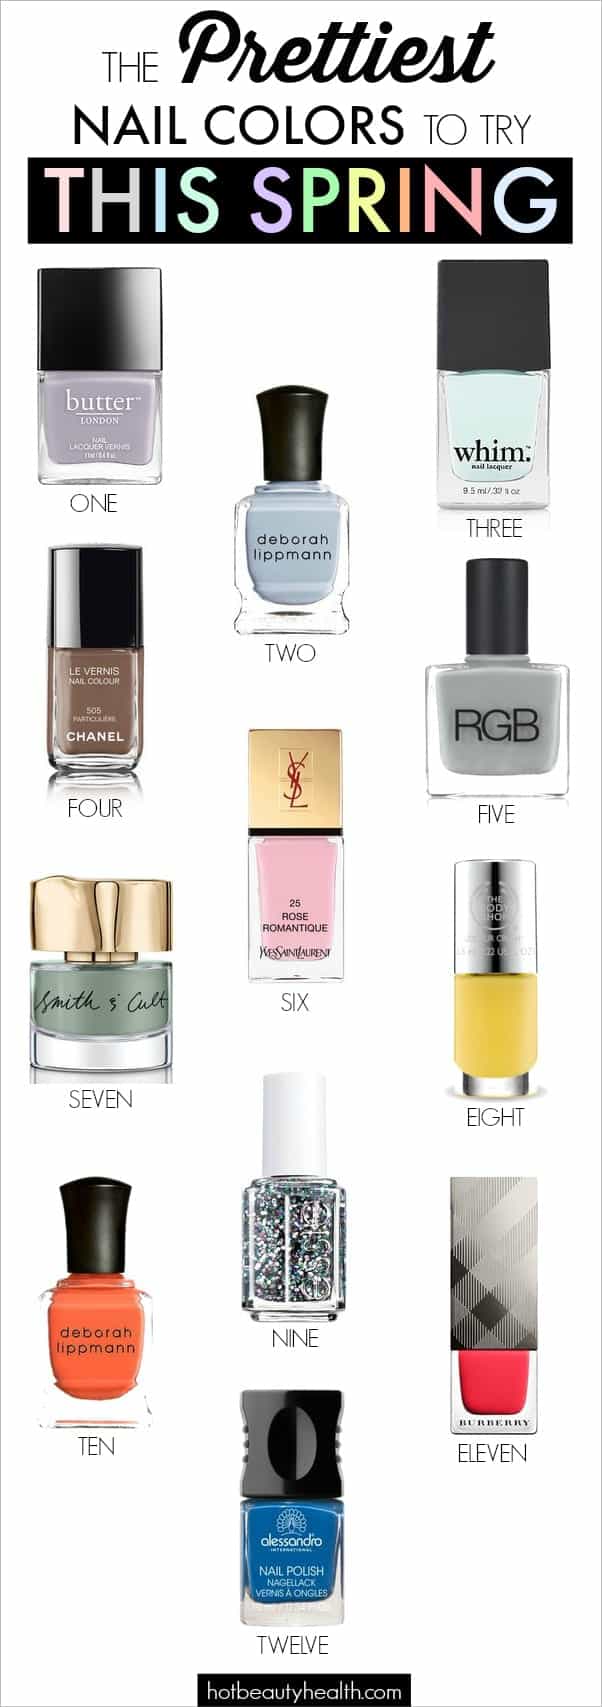 The Prettiest Nail Colors To Try This Spring